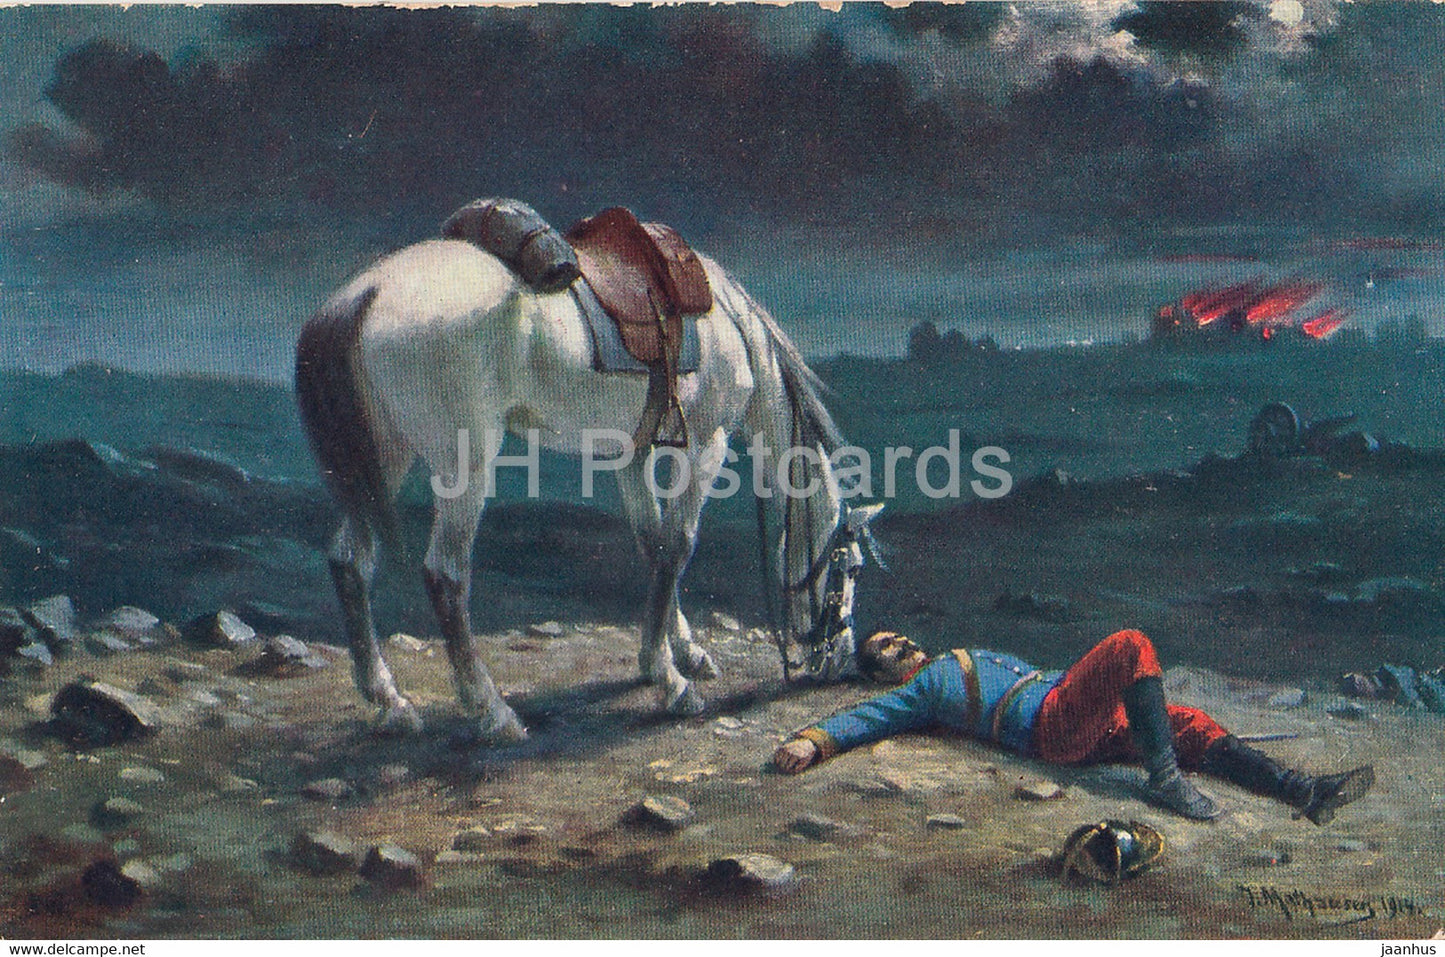 painting by Josef Mathauser - Guter Freund - Horse - Soldier - military - Czech art - old postcard - unused - JH Postcards